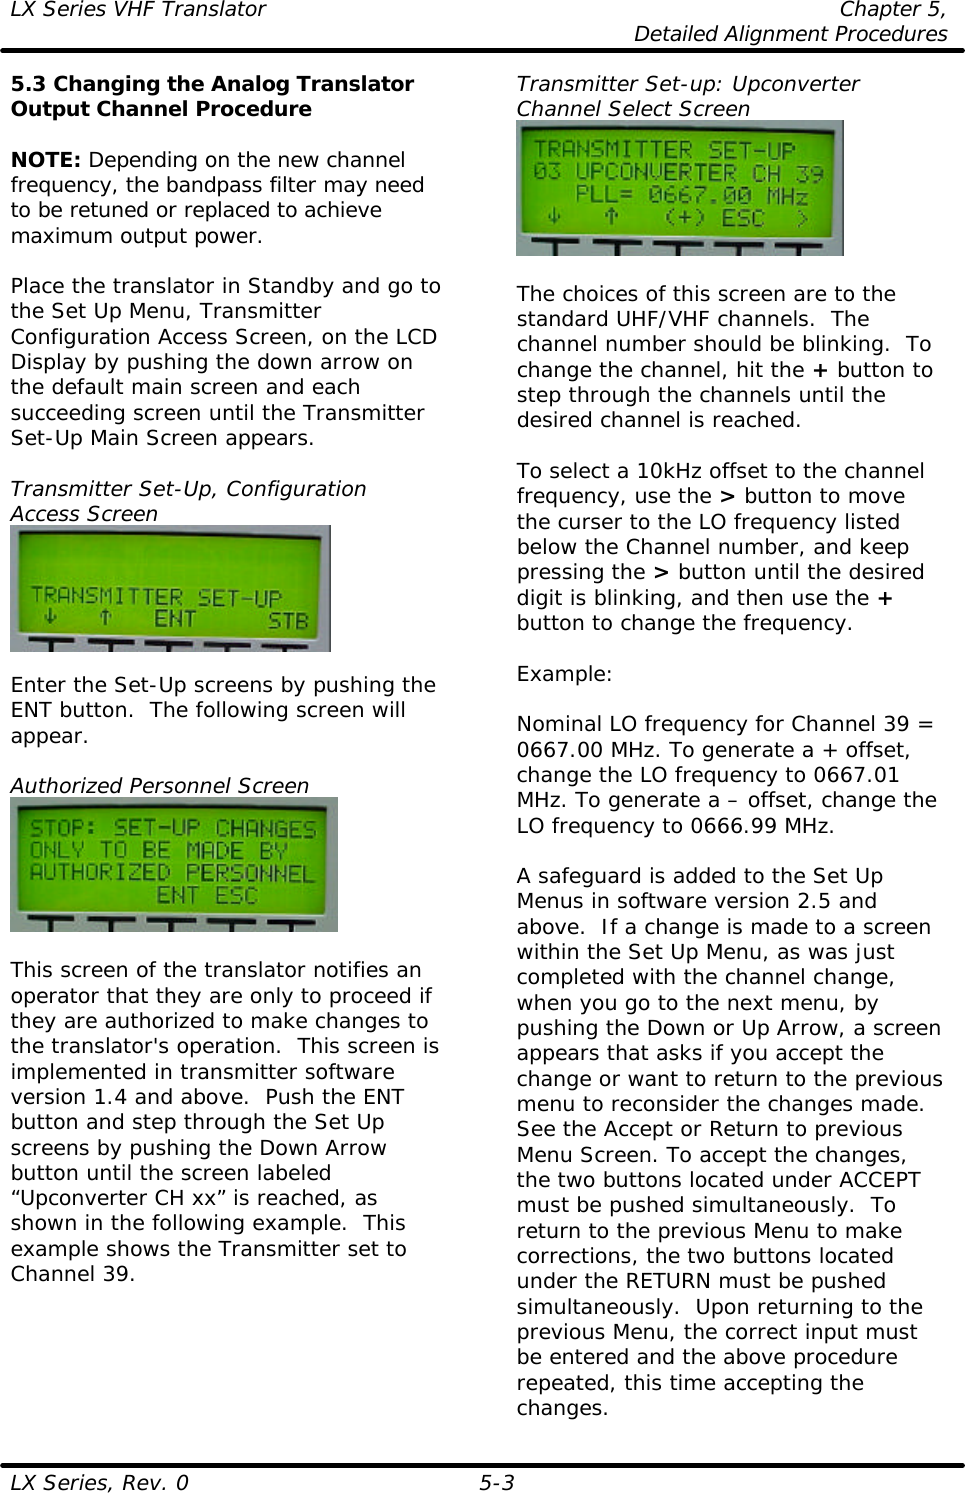 LX Series VHF Translator Chapter 5,  Detailed Alignment Procedures  LX Series, Rev. 0 5-3 5.3 Changing the Analog Translator Output Channel Procedure  NOTE: Depending on the new channel frequency, the bandpass filter may need to be retuned or replaced to achieve maximum output power.  Place the translator in Standby and go to the Set Up Menu, Transmitter Configuration Access Screen, on the LCD Display by pushing the down arrow on the default main screen and each succeeding screen until the Transmitter Set-Up Main Screen appears.  Transmitter Set-Up, Configuration Access Screen   Enter the Set-Up screens by pushing the ENT button.  The following screen will appear.  Authorized Personnel Screen   This screen of the translator notifies an operator that they are only to proceed if they are authorized to make changes to the translator&apos;s operation.  This screen is implemented in transmitter software version 1.4 and above.  Push the ENT button and step through the Set Up screens by pushing the Down Arrow button until the screen labeled “Upconverter CH xx” is reached, as shown in the following example.  This example shows the Transmitter set to Channel 39. Transmitter Set-up: Upconverter Channel Select Screen   The choices of this screen are to the standard UHF/VHF channels.  The channel number should be blinking.  To change the channel, hit the + button to step through the channels until the desired channel is reached.   To select a 10kHz offset to the channel frequency, use the &gt; button to move the curser to the LO frequency listed below the Channel number, and keep pressing the &gt; button until the desired digit is blinking, and then use the + button to change the frequency.   Example:  Nominal LO frequency for Channel 39 = 0667.00 MHz. To generate a + offset, change the LO frequency to 0667.01 MHz. To generate a – offset, change the LO frequency to 0666.99 MHz.  A safeguard is added to the Set Up Menus in software version 2.5 and above.  If a change is made to a screen within the Set Up Menu, as was just completed with the channel change, when you go to the next menu, by pushing the Down or Up Arrow, a screen appears that asks if you accept the change or want to return to the previous menu to reconsider the changes made.  See the Accept or Return to previous Menu Screen. To accept the changes, the two buttons located under ACCEPT must be pushed simultaneously.  To return to the previous Menu to make corrections, the two buttons located under the RETURN must be pushed simultaneously.  Upon returning to the previous Menu, the correct input must be entered and the above procedure repeated, this time accepting the changes. 